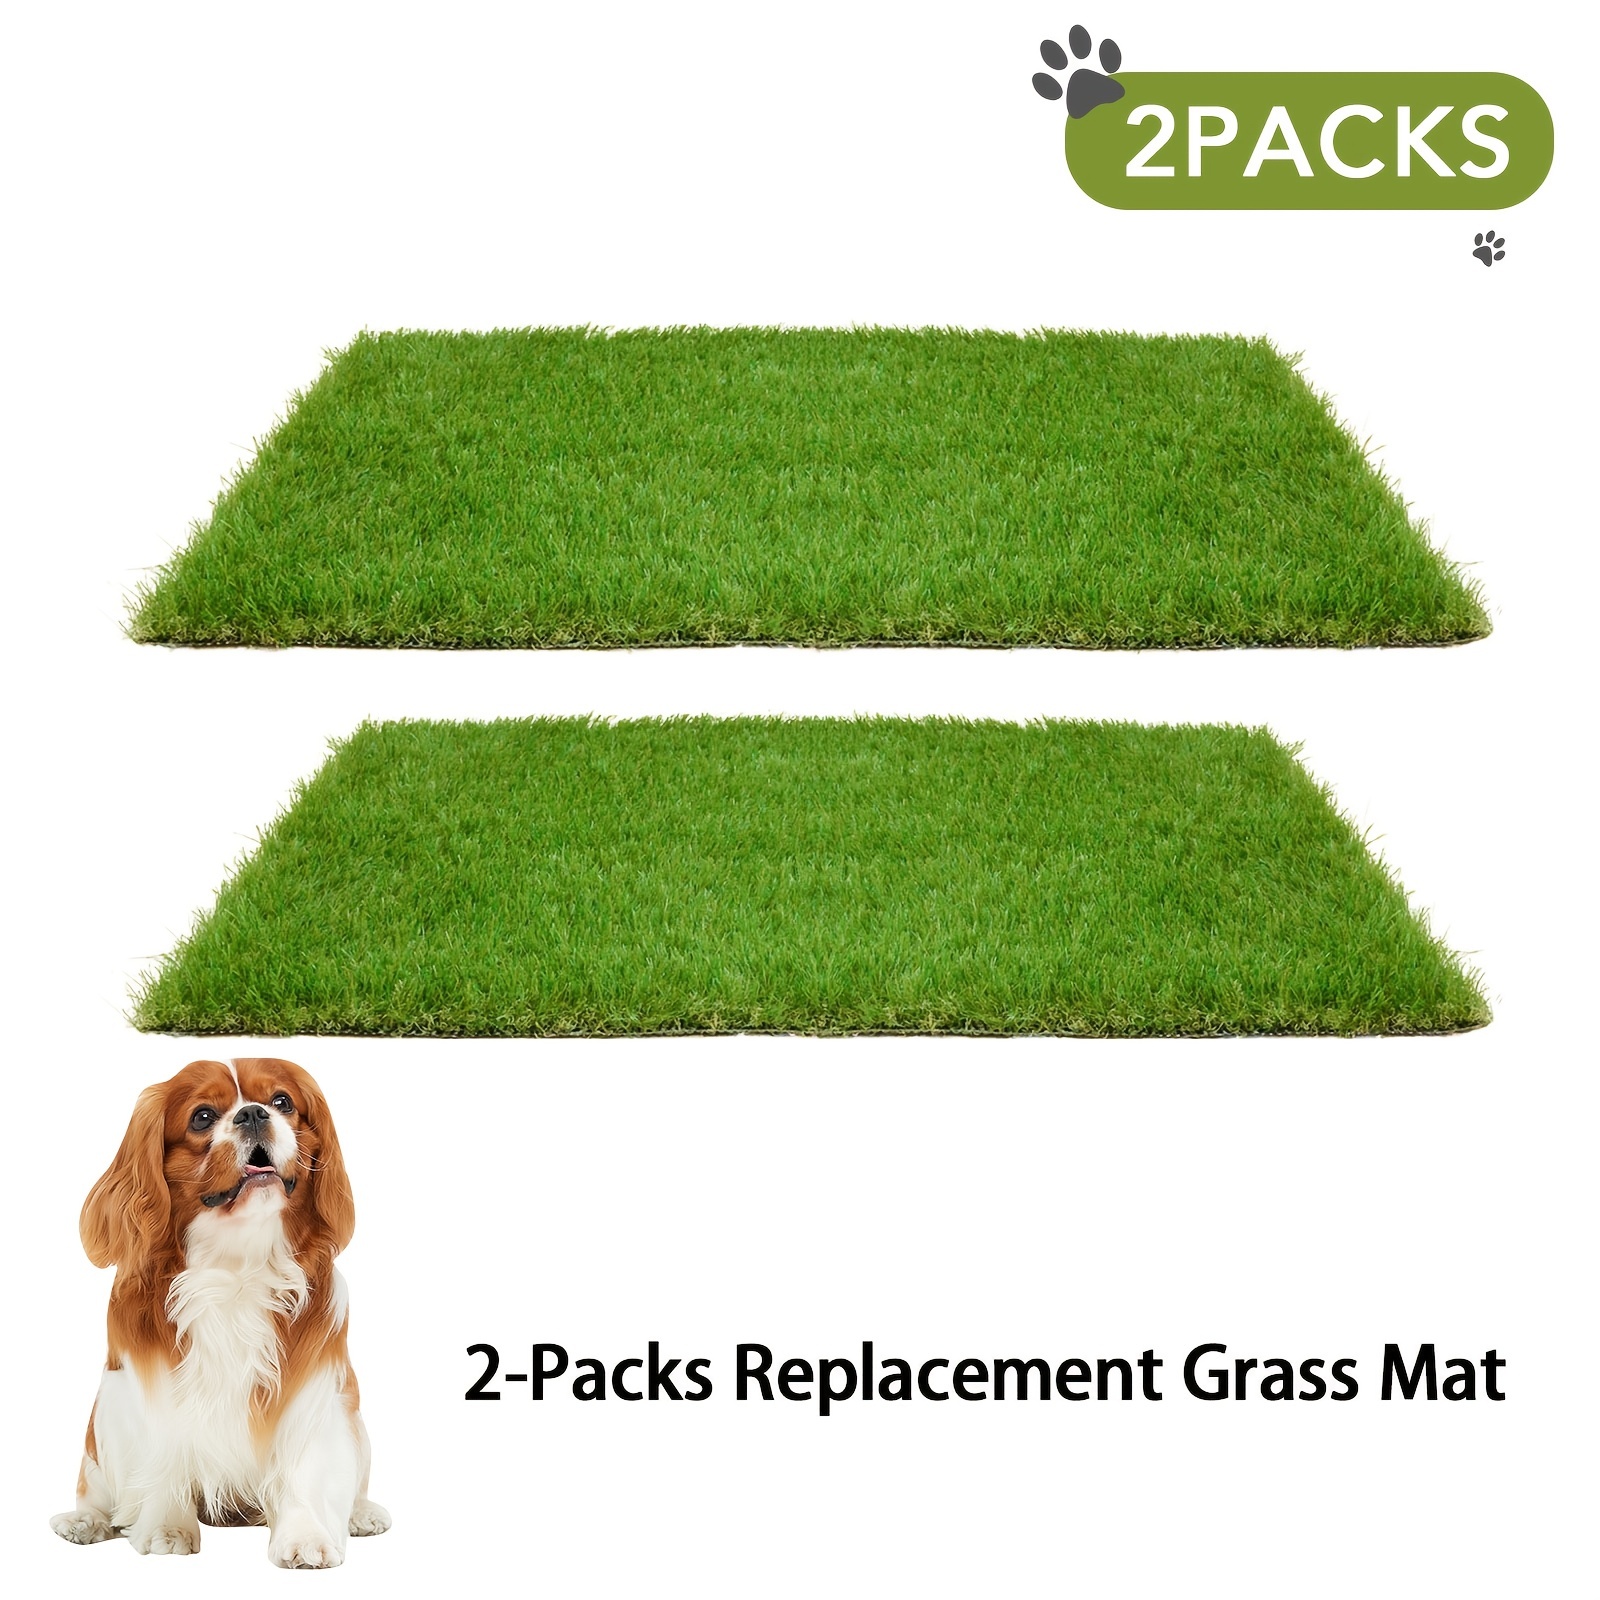 2 Packs Artificial Grass Dog Mat | Washable Dog Crate Mat | Reusable Puppy Pee Training Pad 24x16Inch